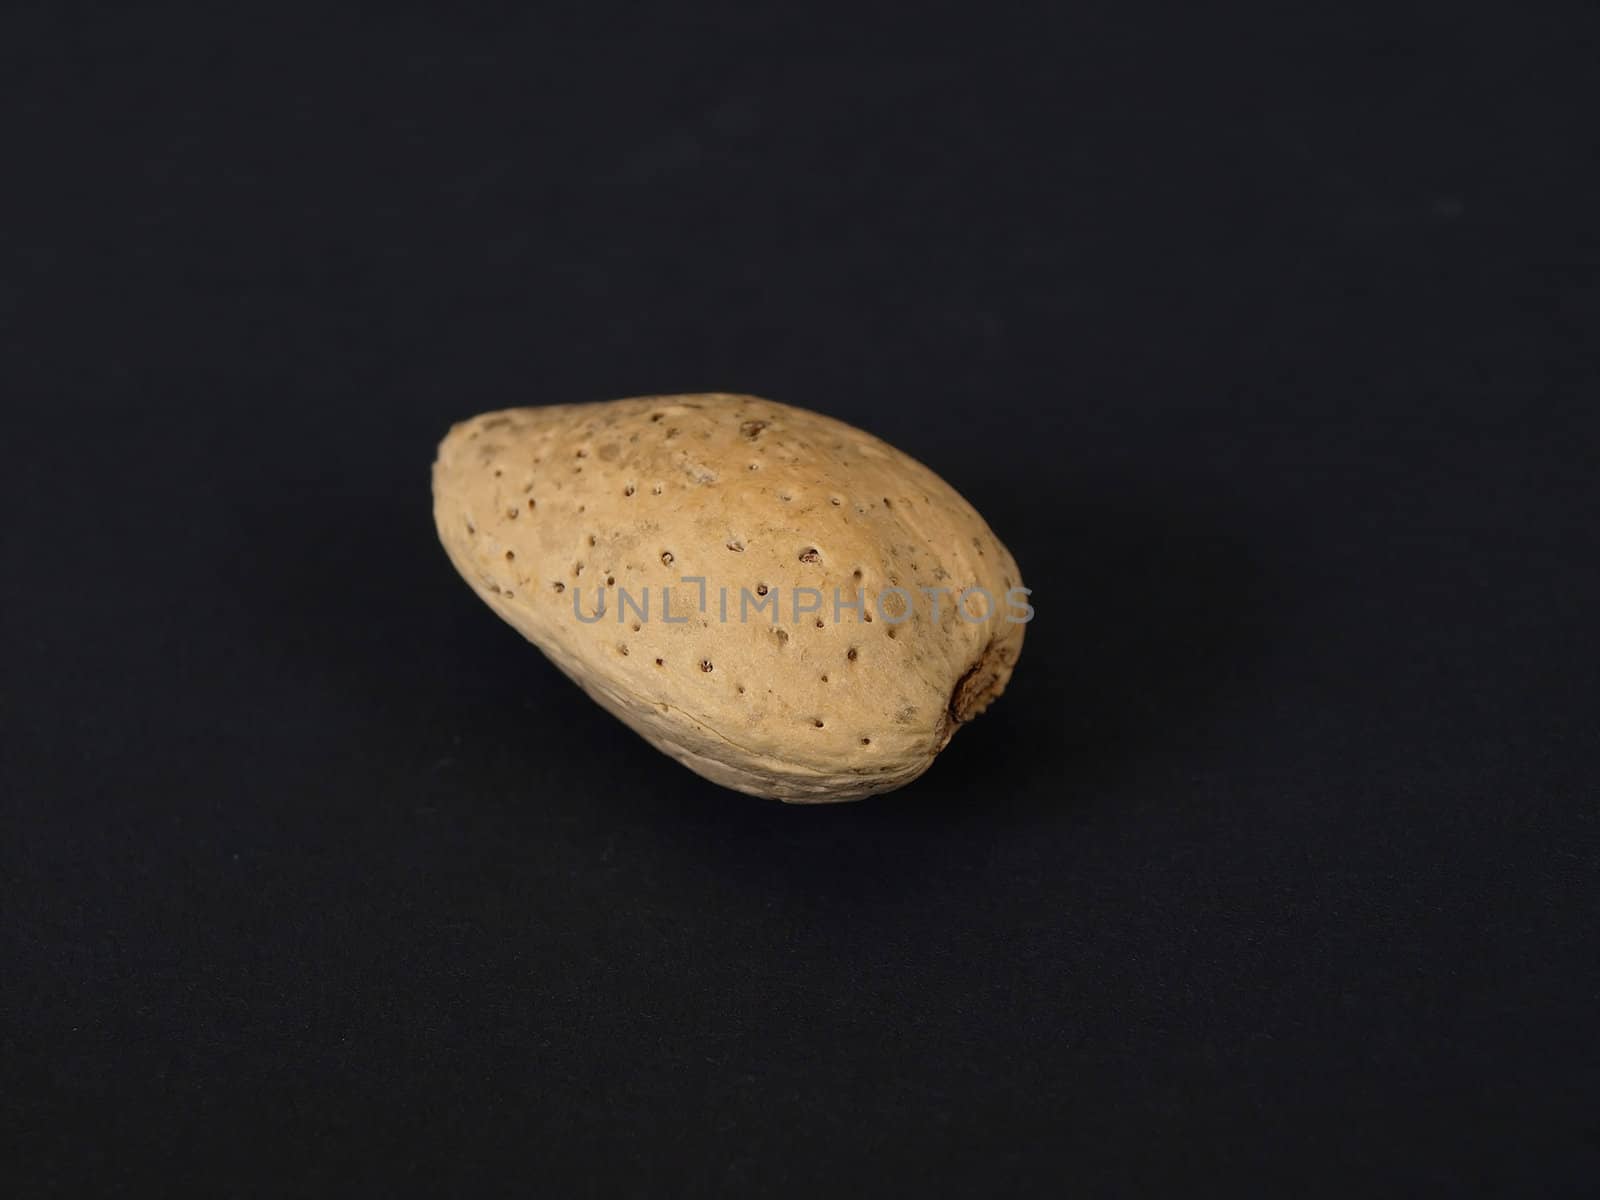 A solitary almond isolated against a black background.